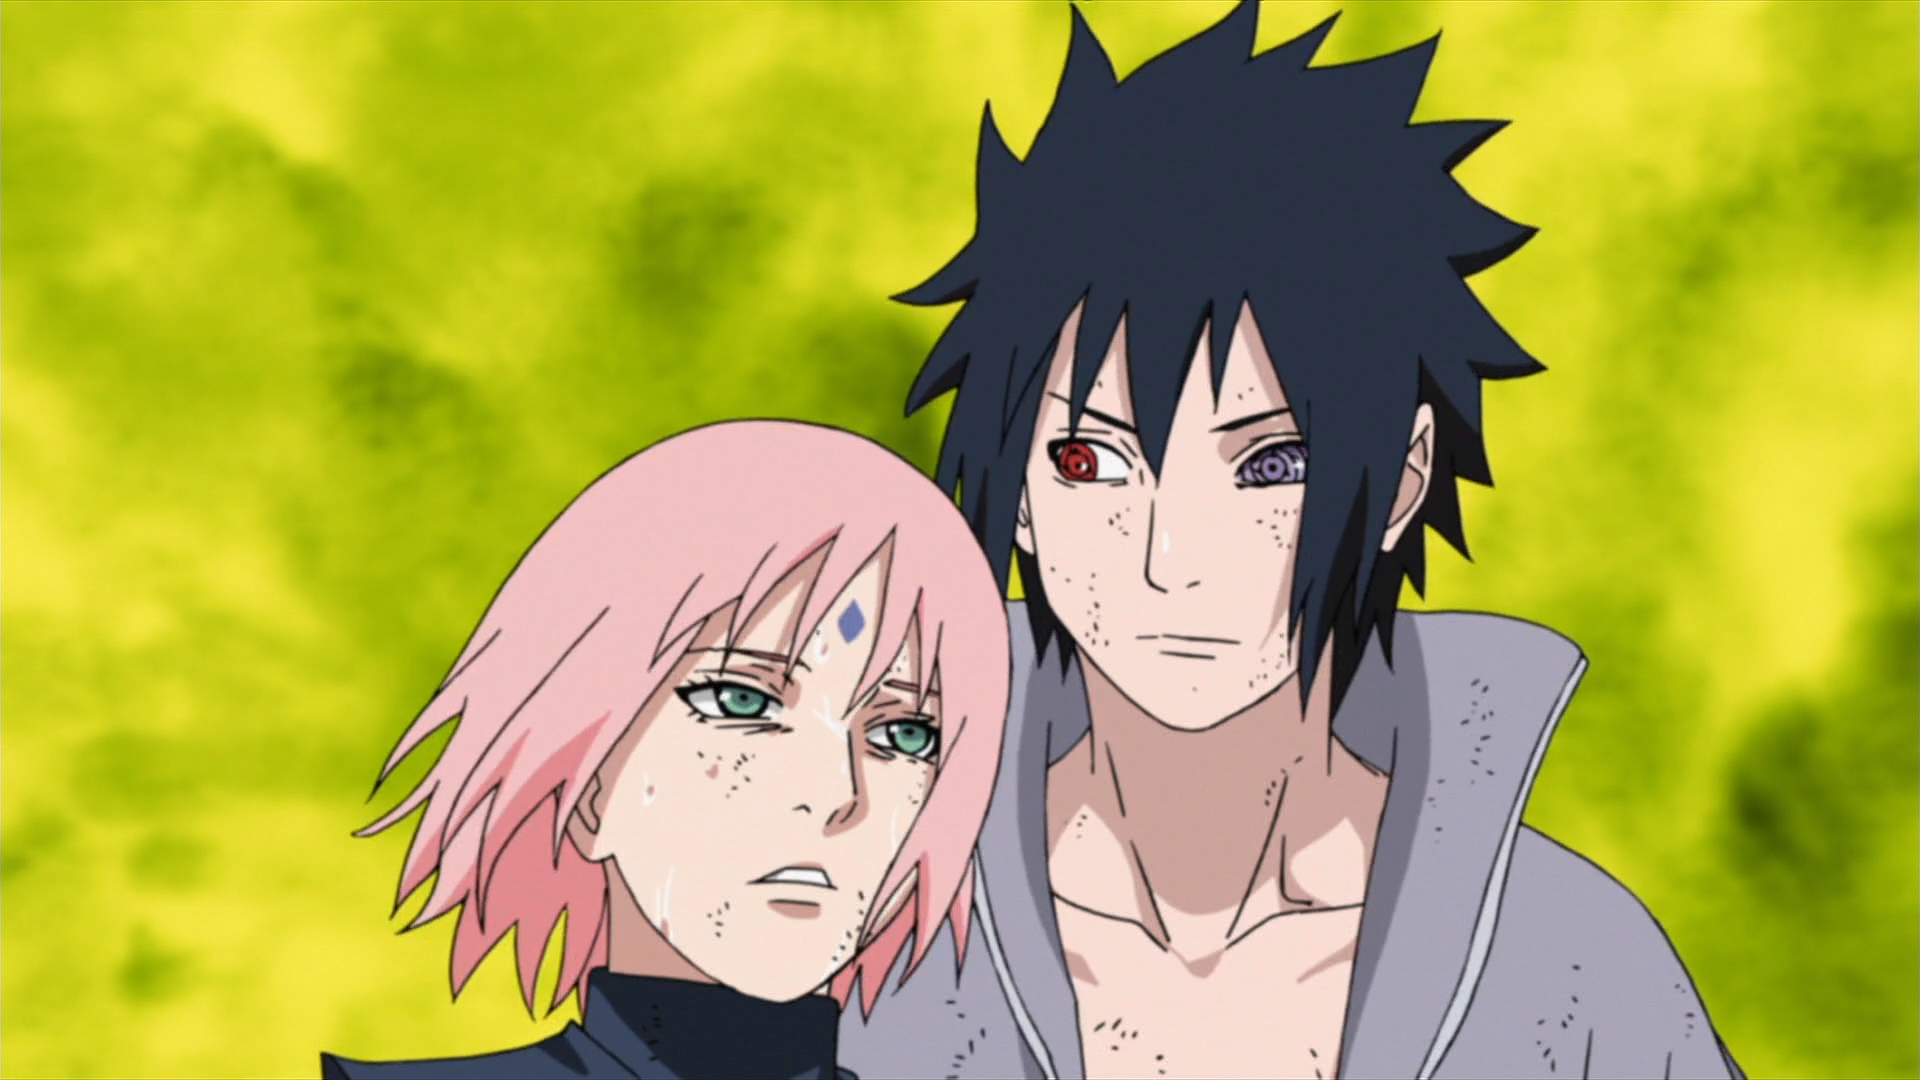 In which episode did Sasuke and Naruto fight? I have watched the whole  Naruto series, and there is a scene where Sakura has Naruto's head on her  lap and is crying. When